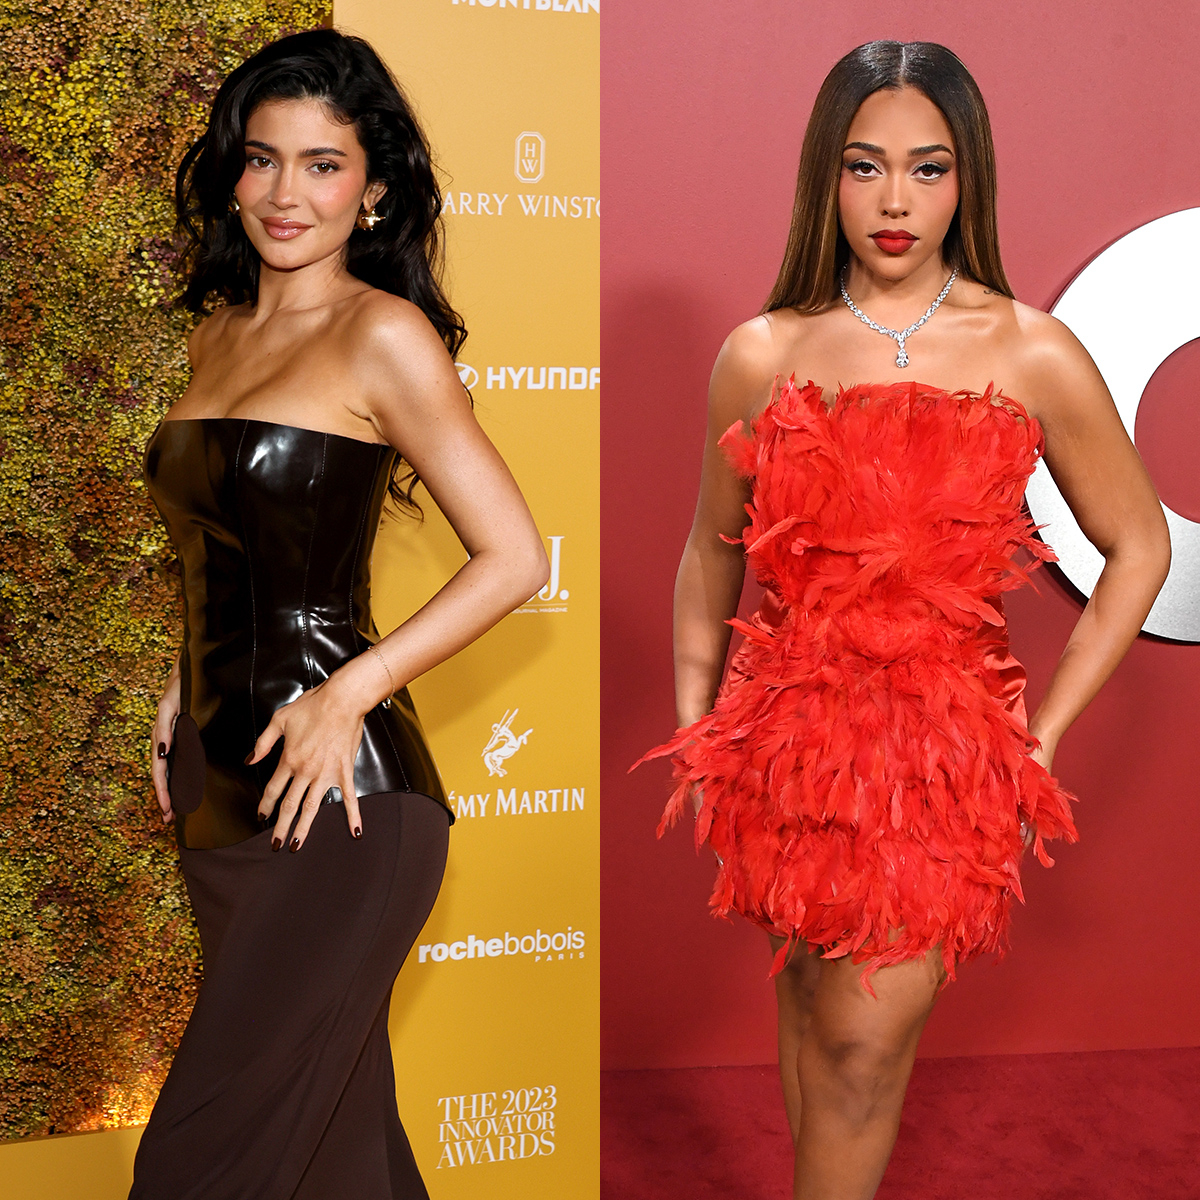 Kylie Jenner Reveals She And Jordyn Woods “never Fully Cut Each Other Off” After Tristan 